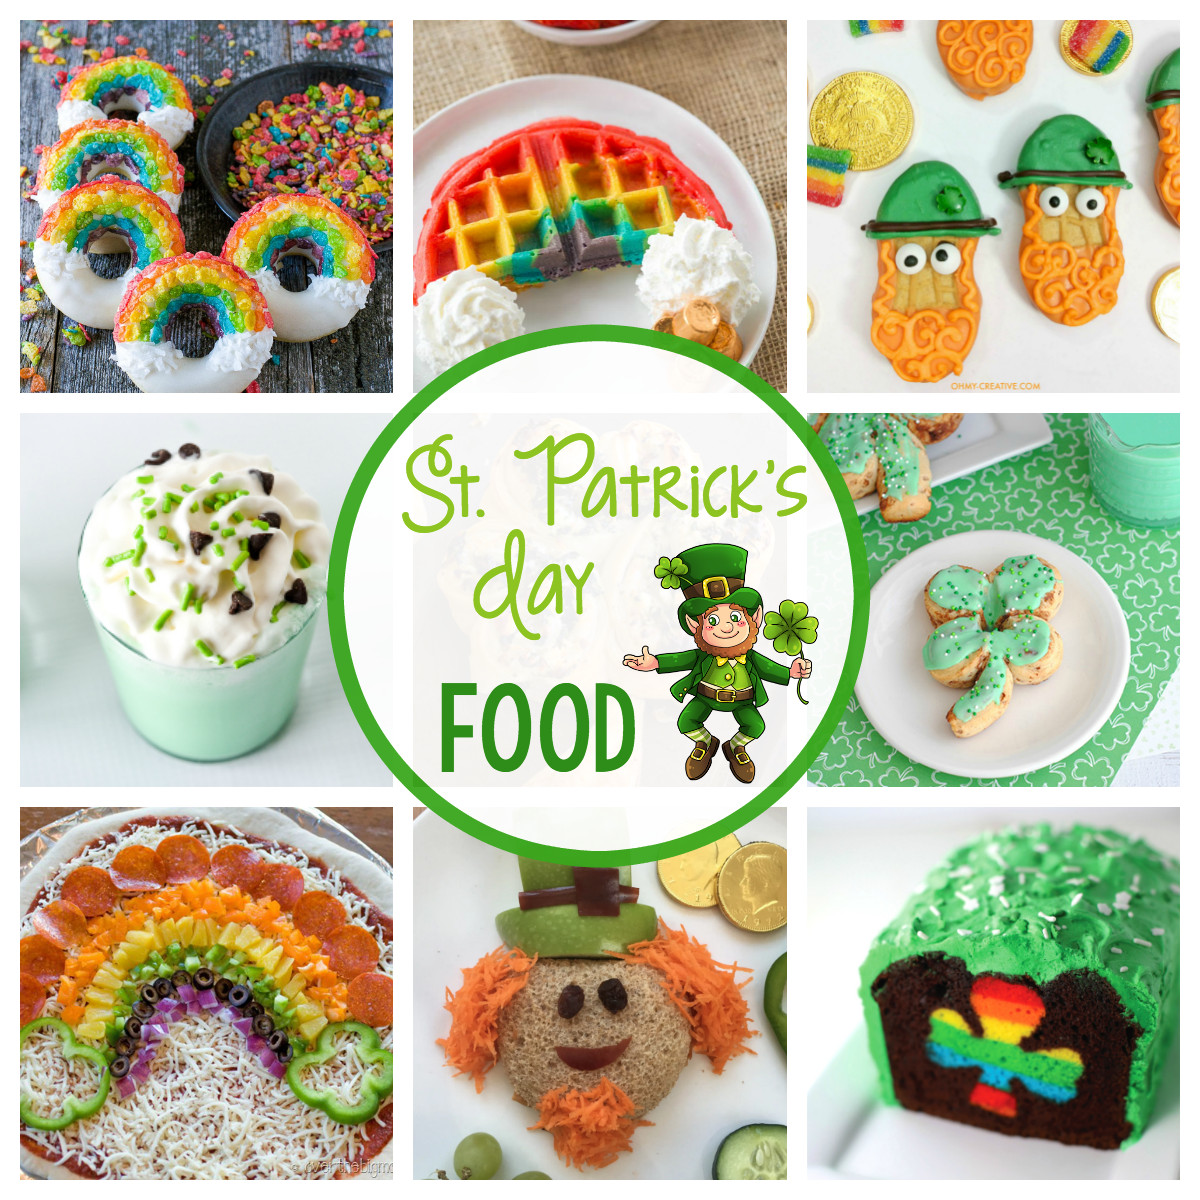 St Patrick's Day Meals Ideas
 17 St Patrick s Day Food Ideas for Kids – Fun Squared